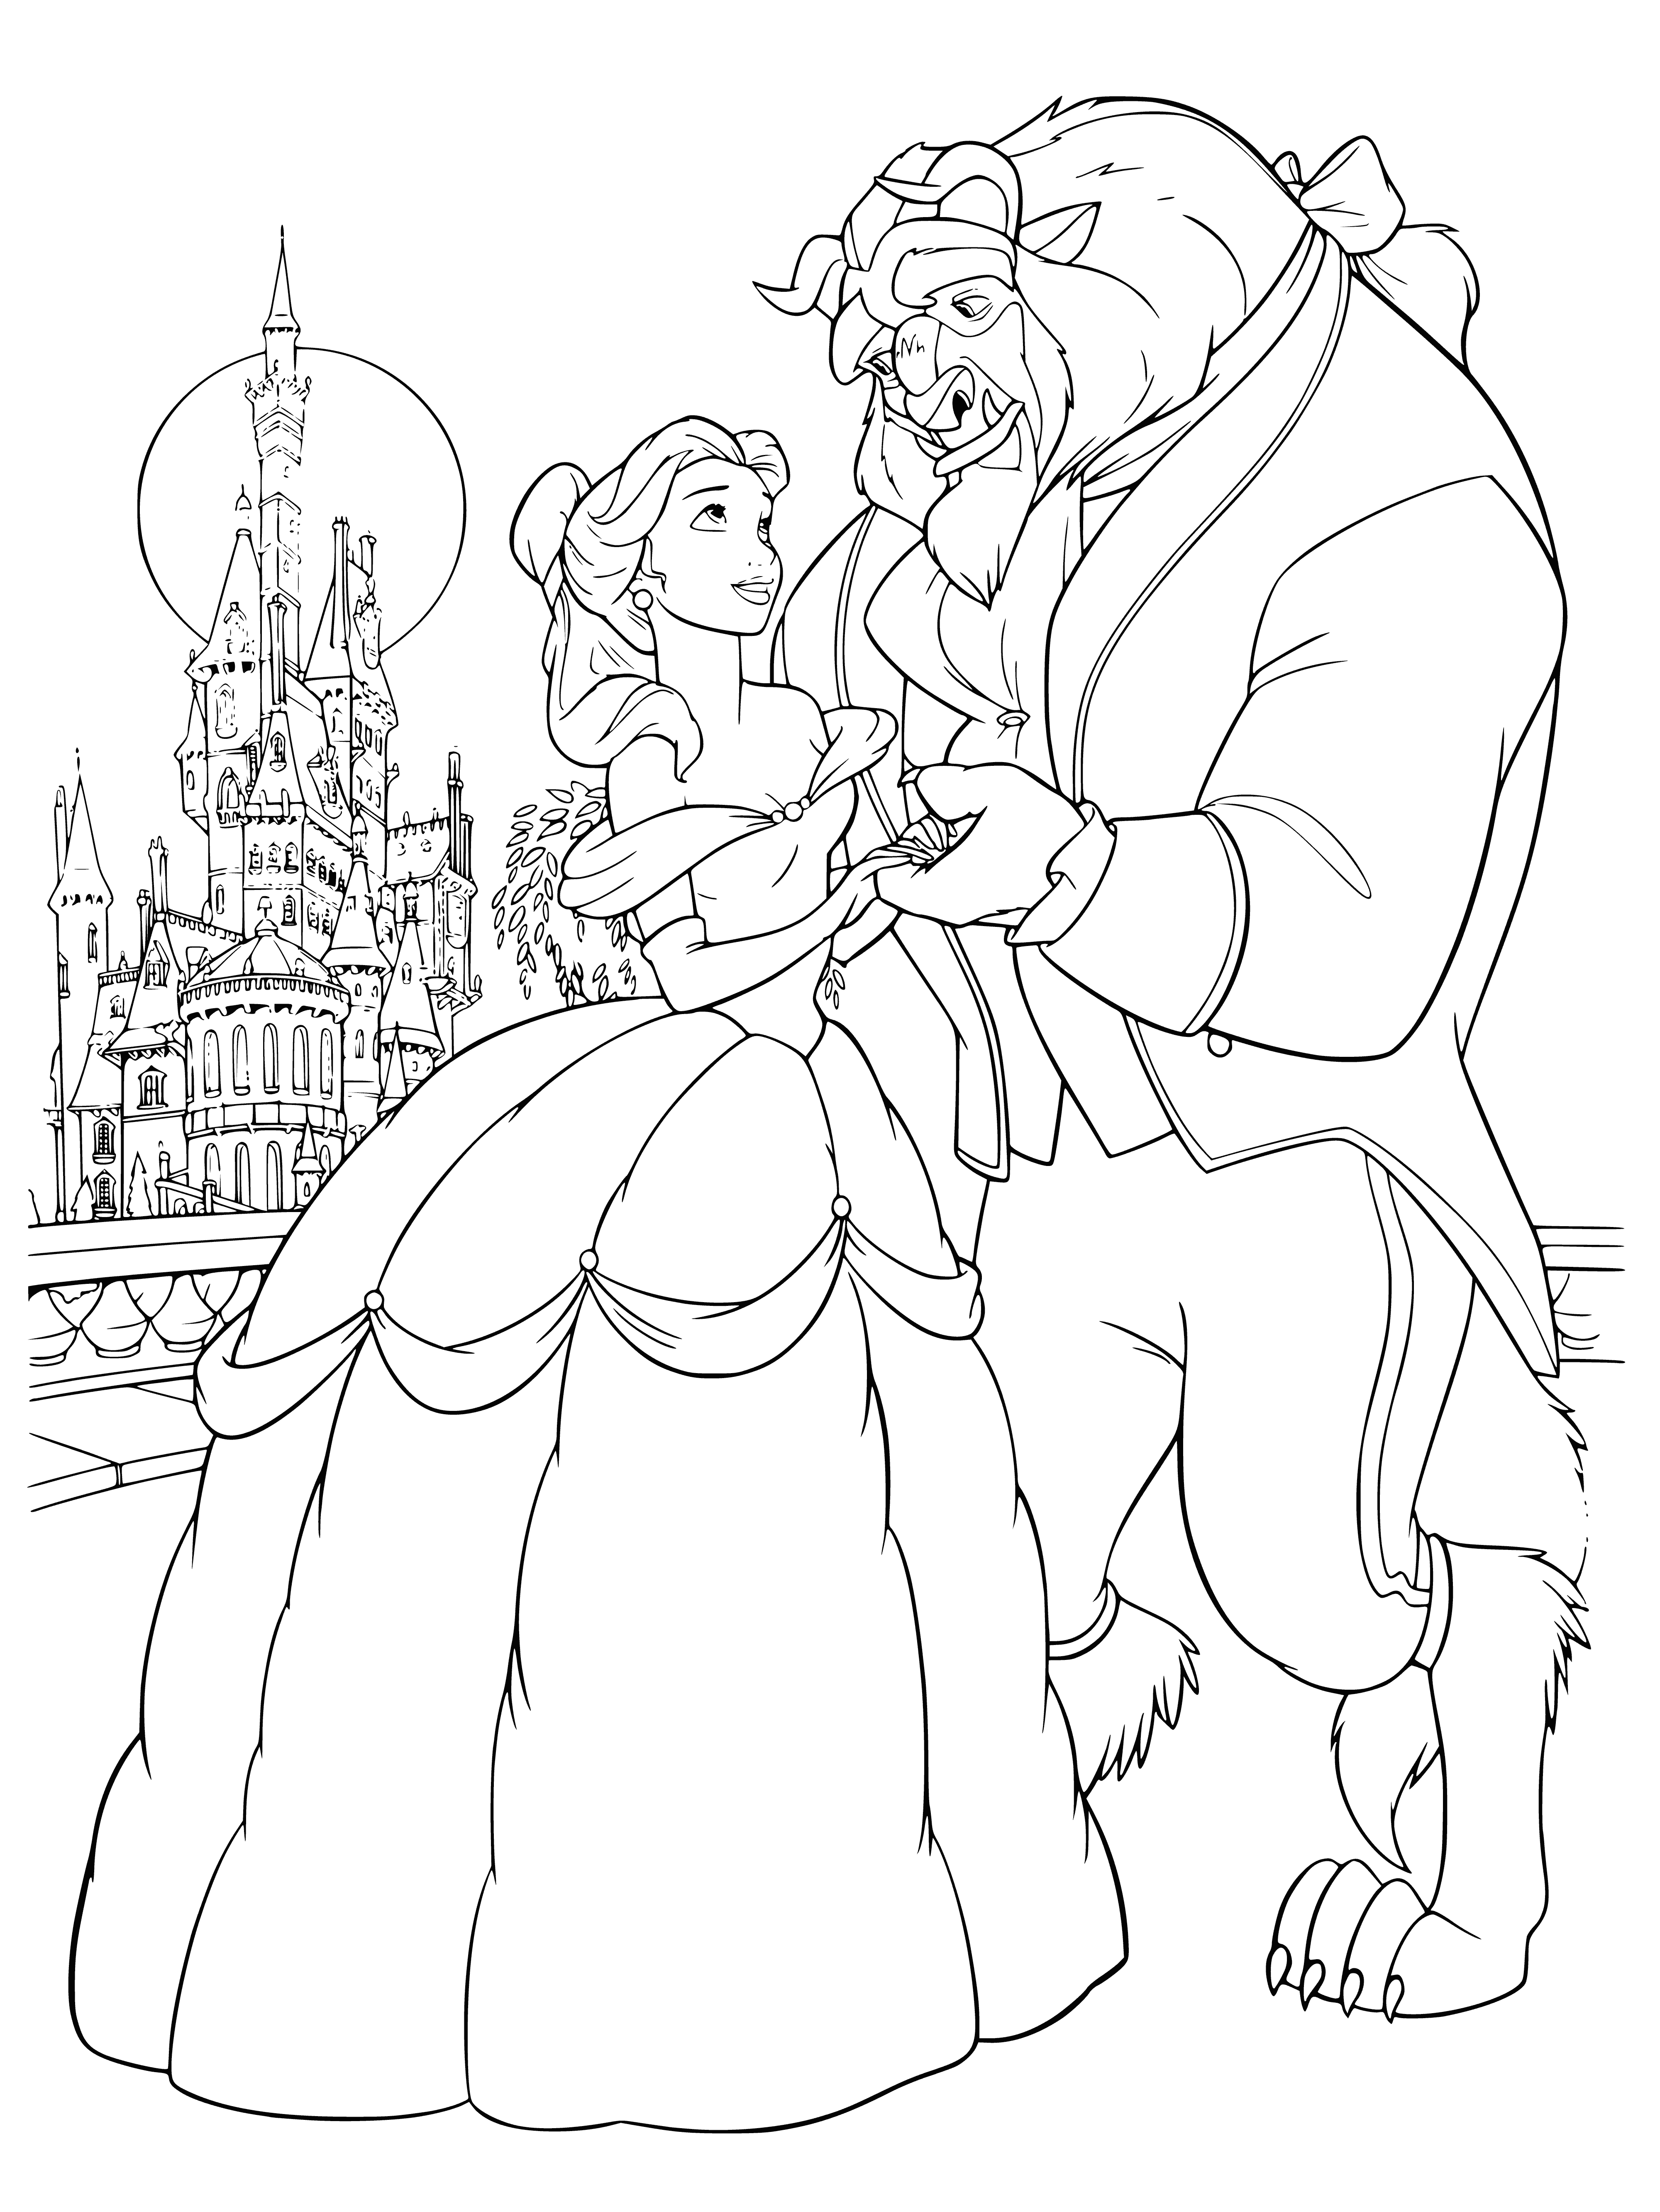 coloring page: A woman in white stands in front of a castle under a full moon in a field of trees.